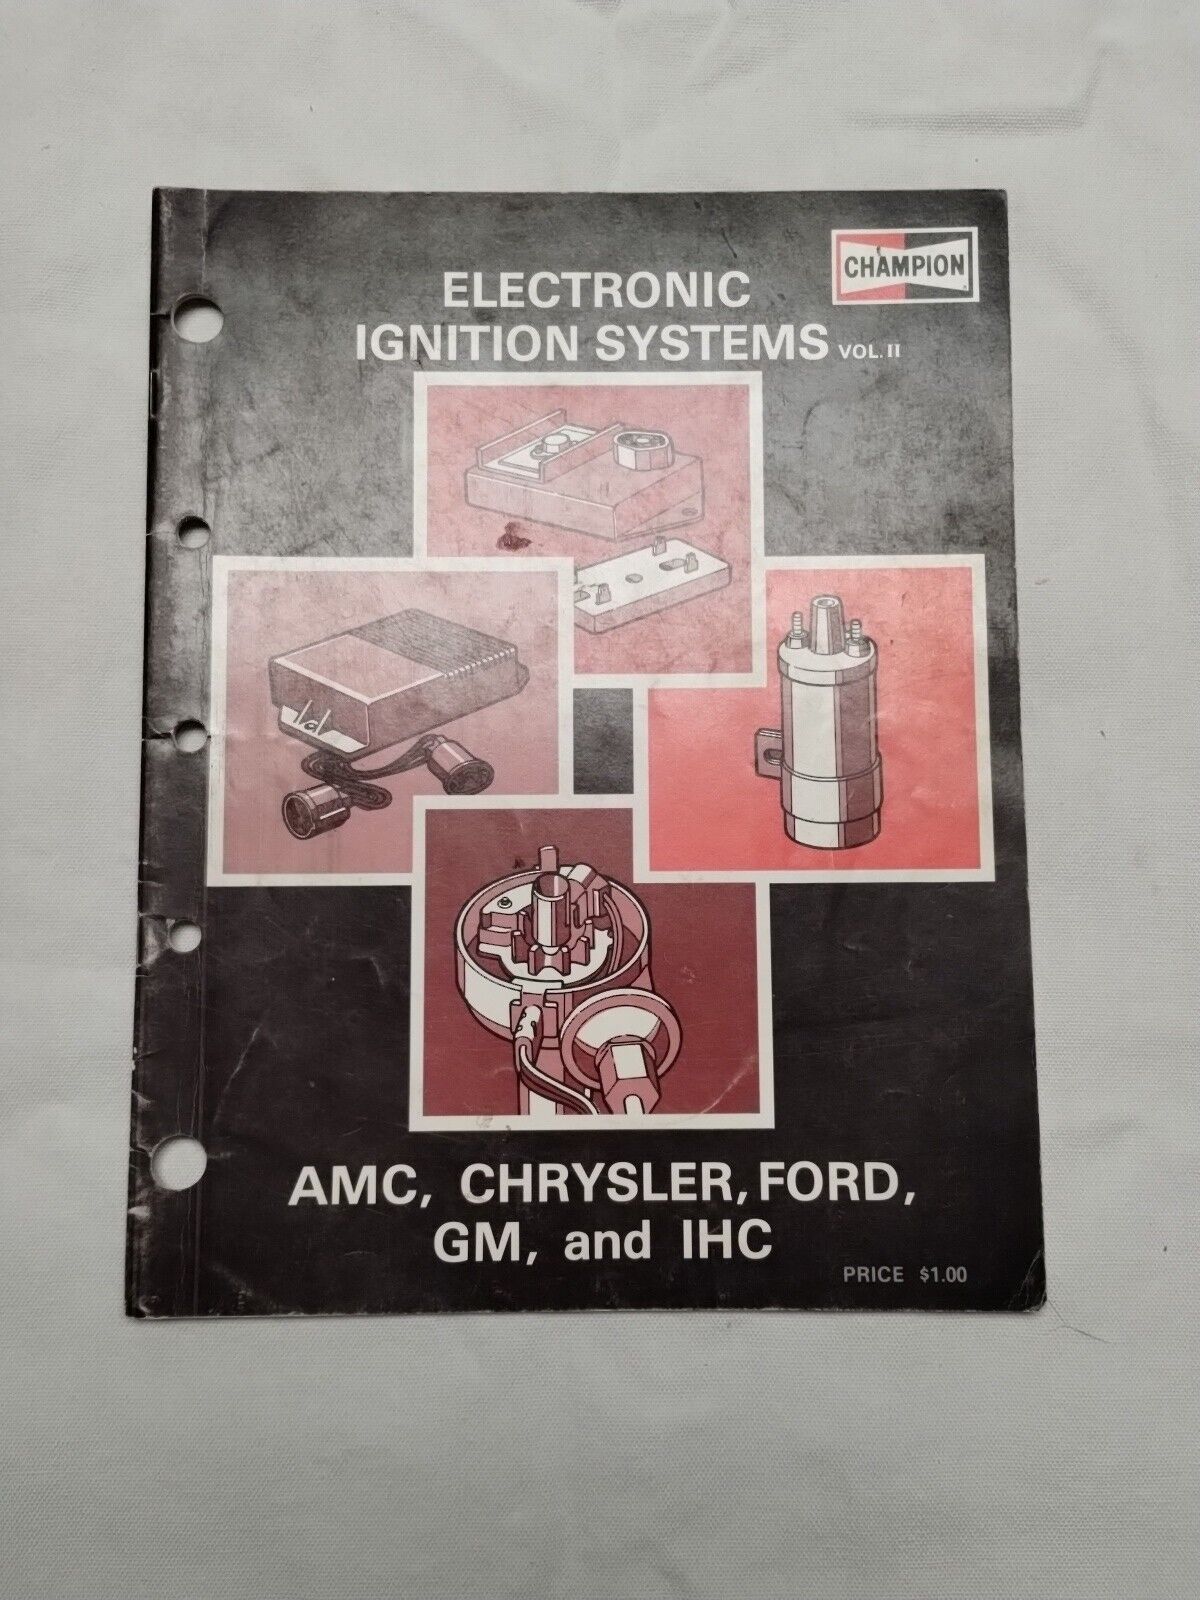 Vintage 1976 Champion Electronic Ignition Systems Vol 2 Booklet